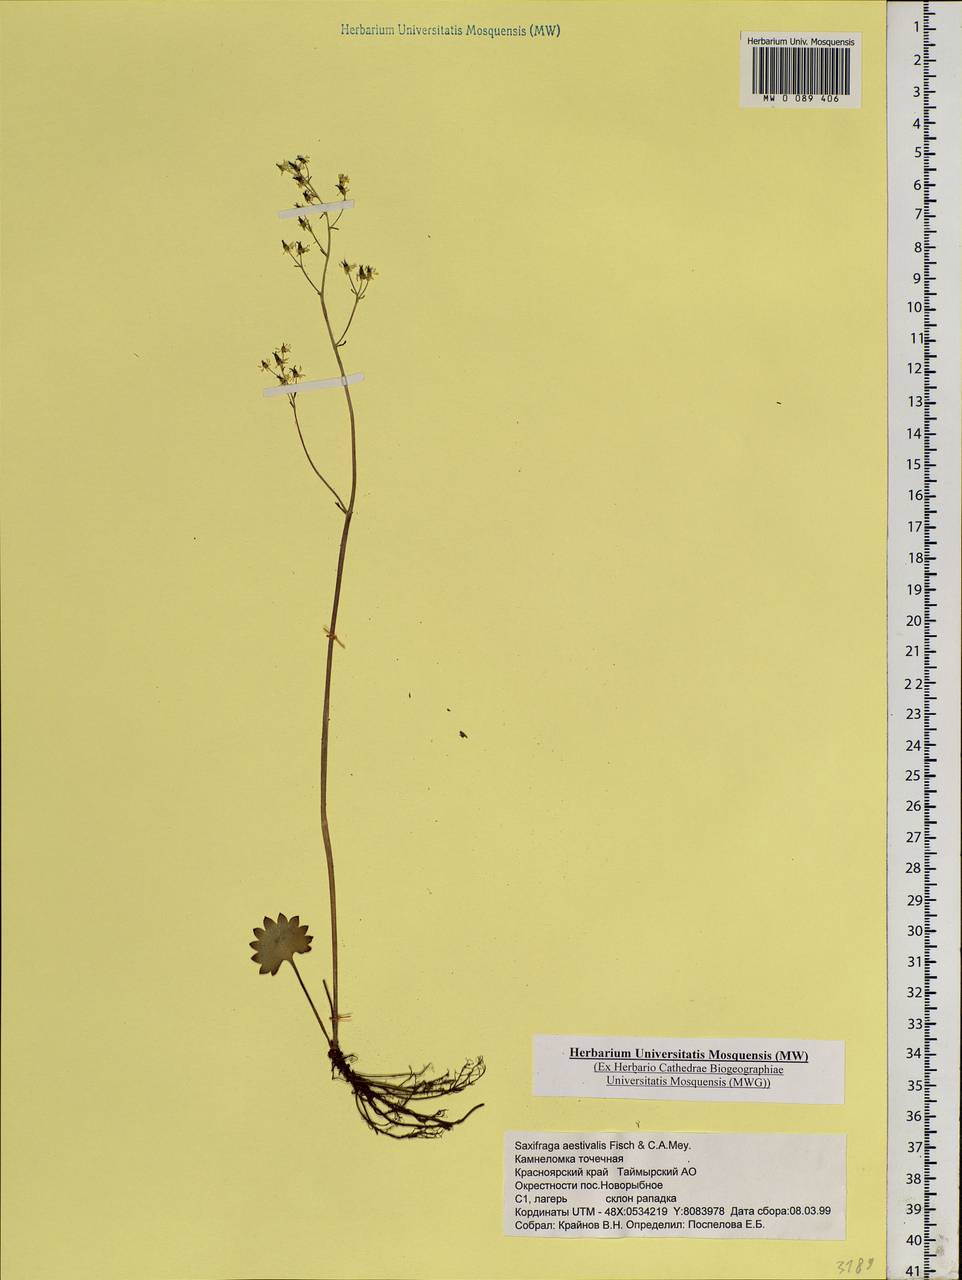 Micranthes nelsoniana subsp. aestivalis (Fisch. & C. A. Mey.) Elven & D. F. Murray, Siberia, Central Siberia (S3) (Russia)